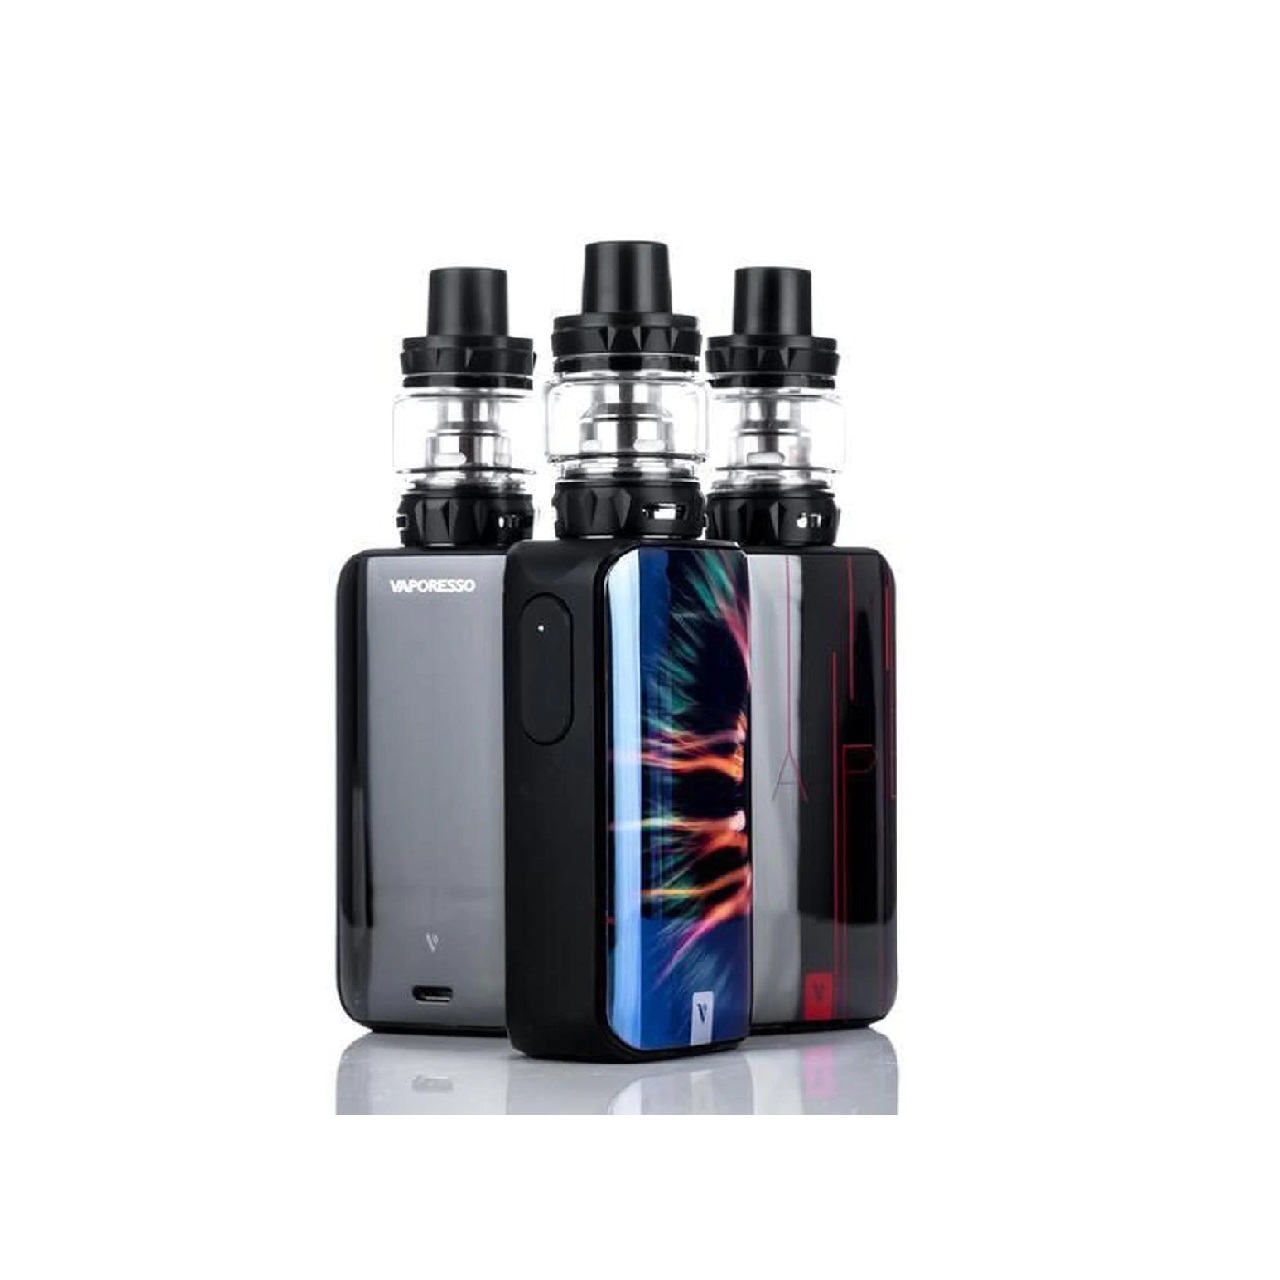 Vaporesso LUXE S 220W Kit with SKRR S Tank | £36.99 Only 